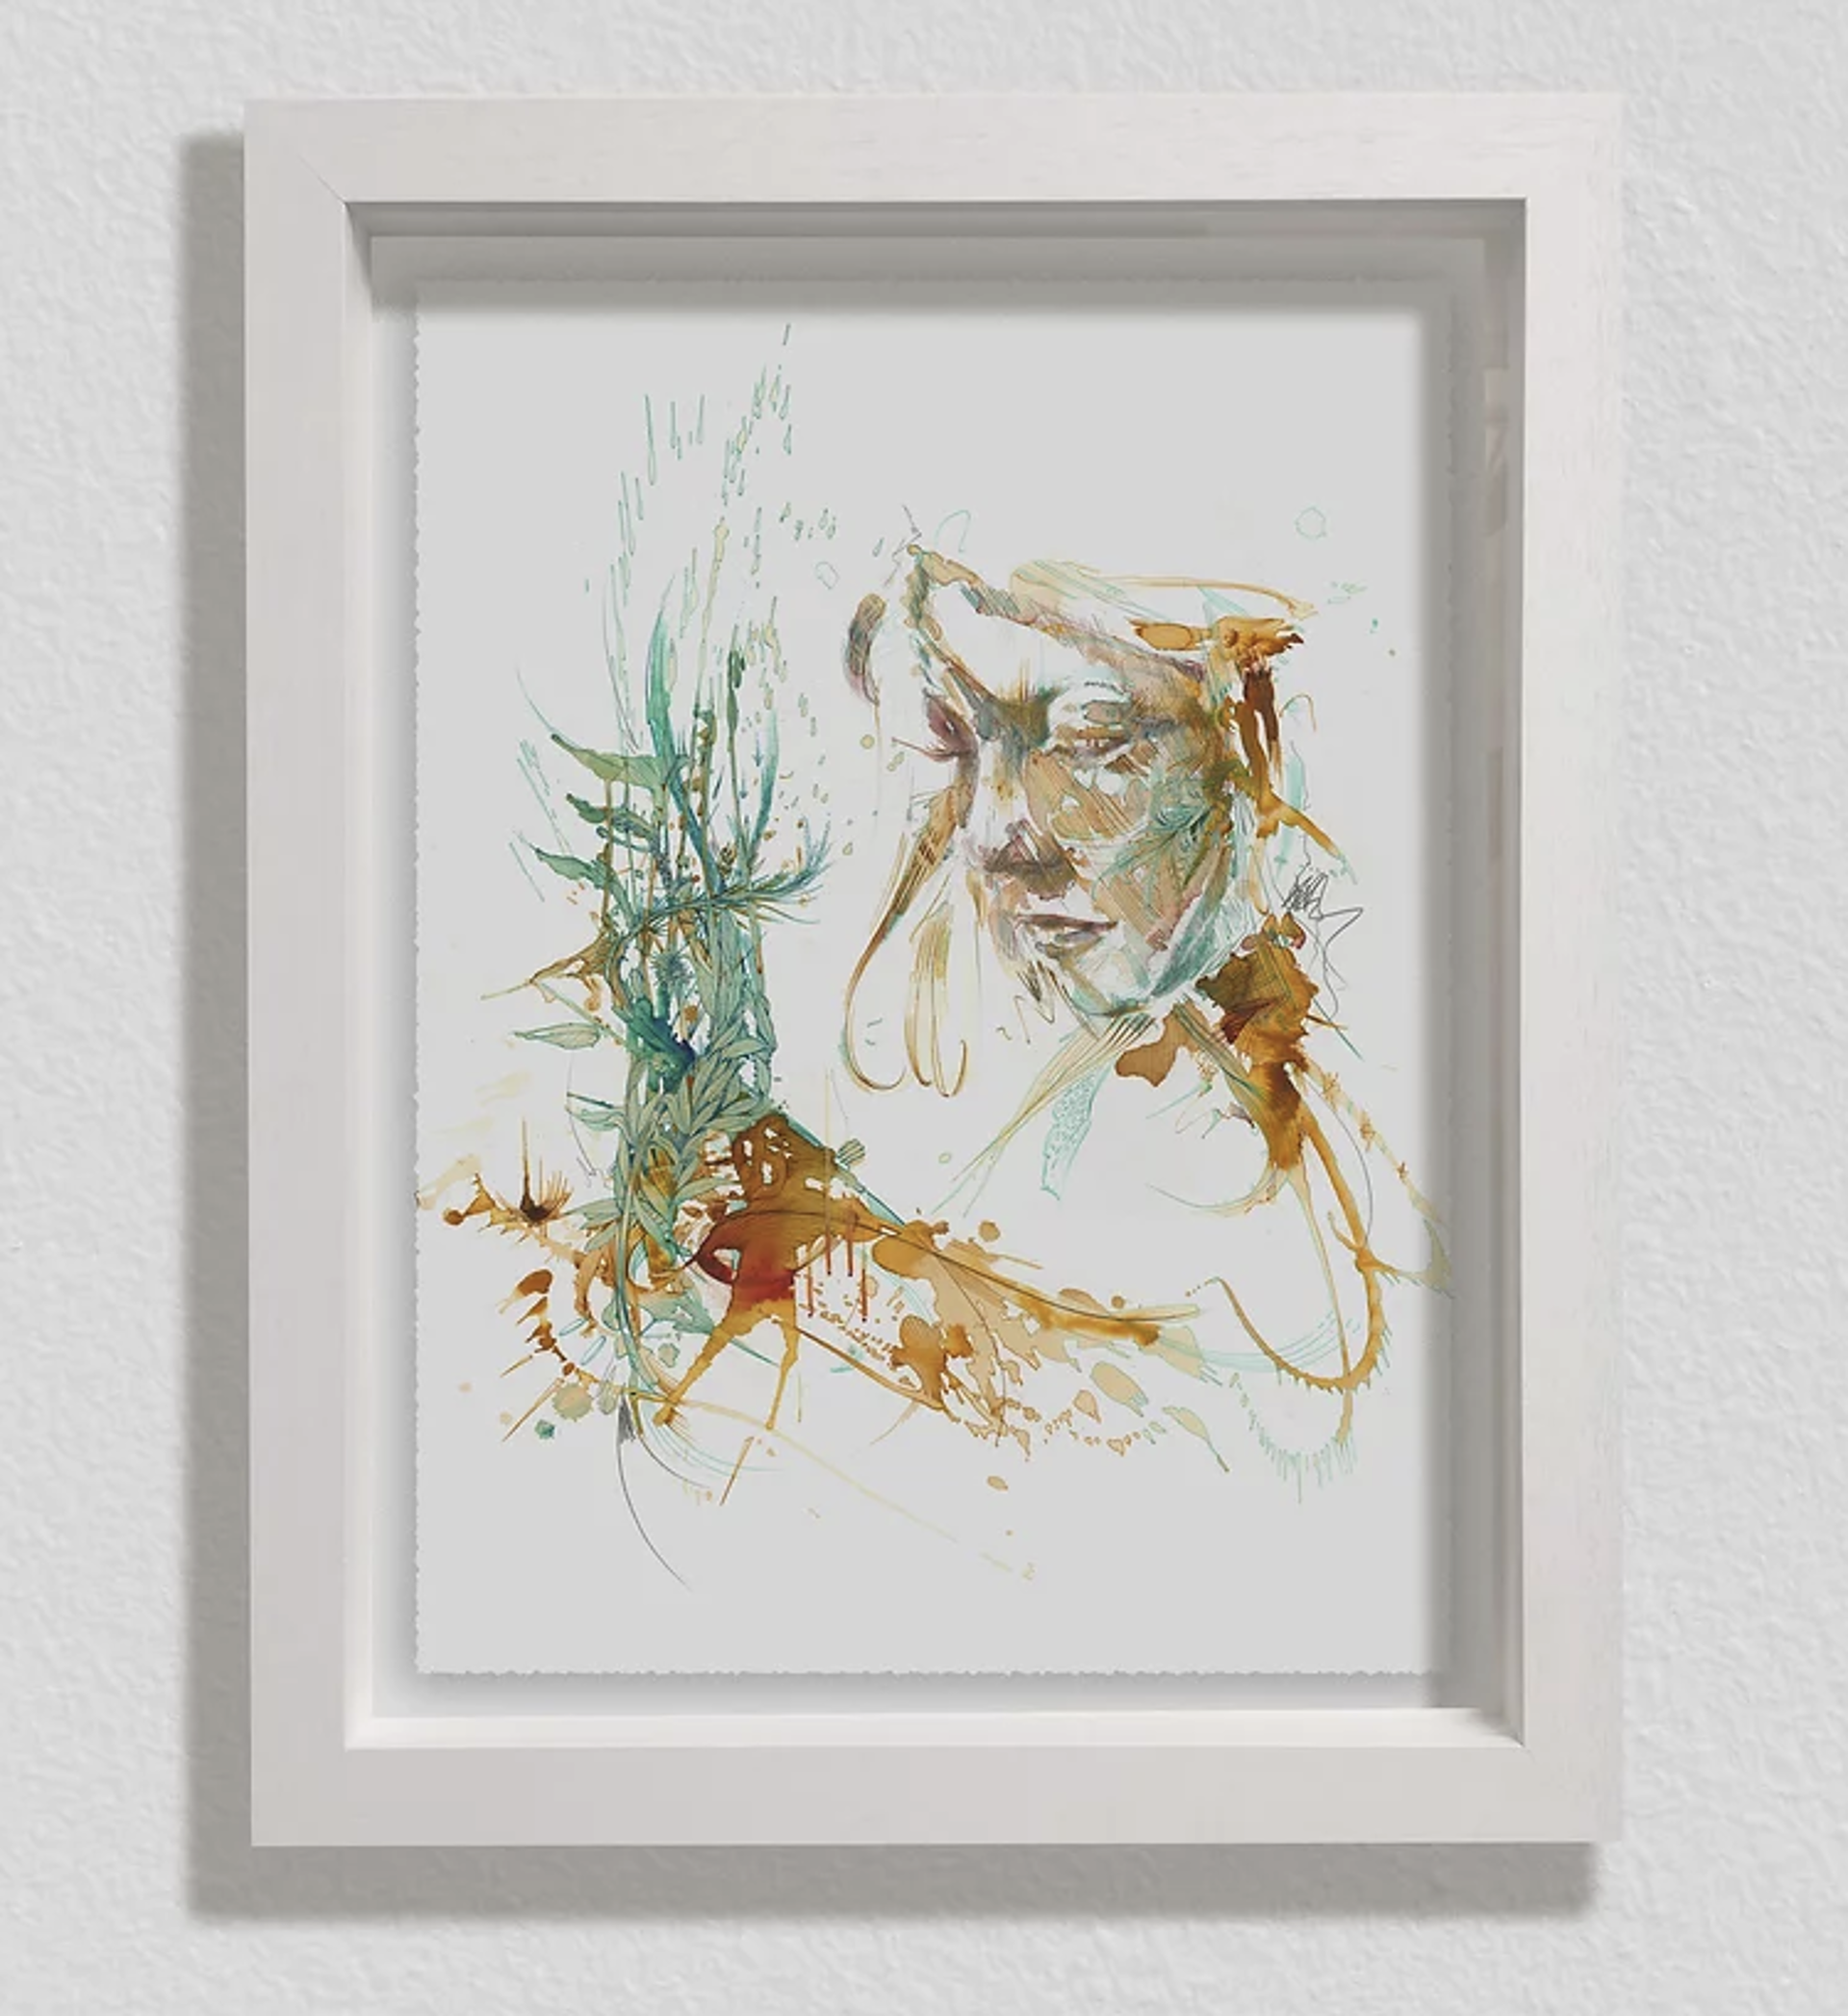 String Theory by Carne Griffiths